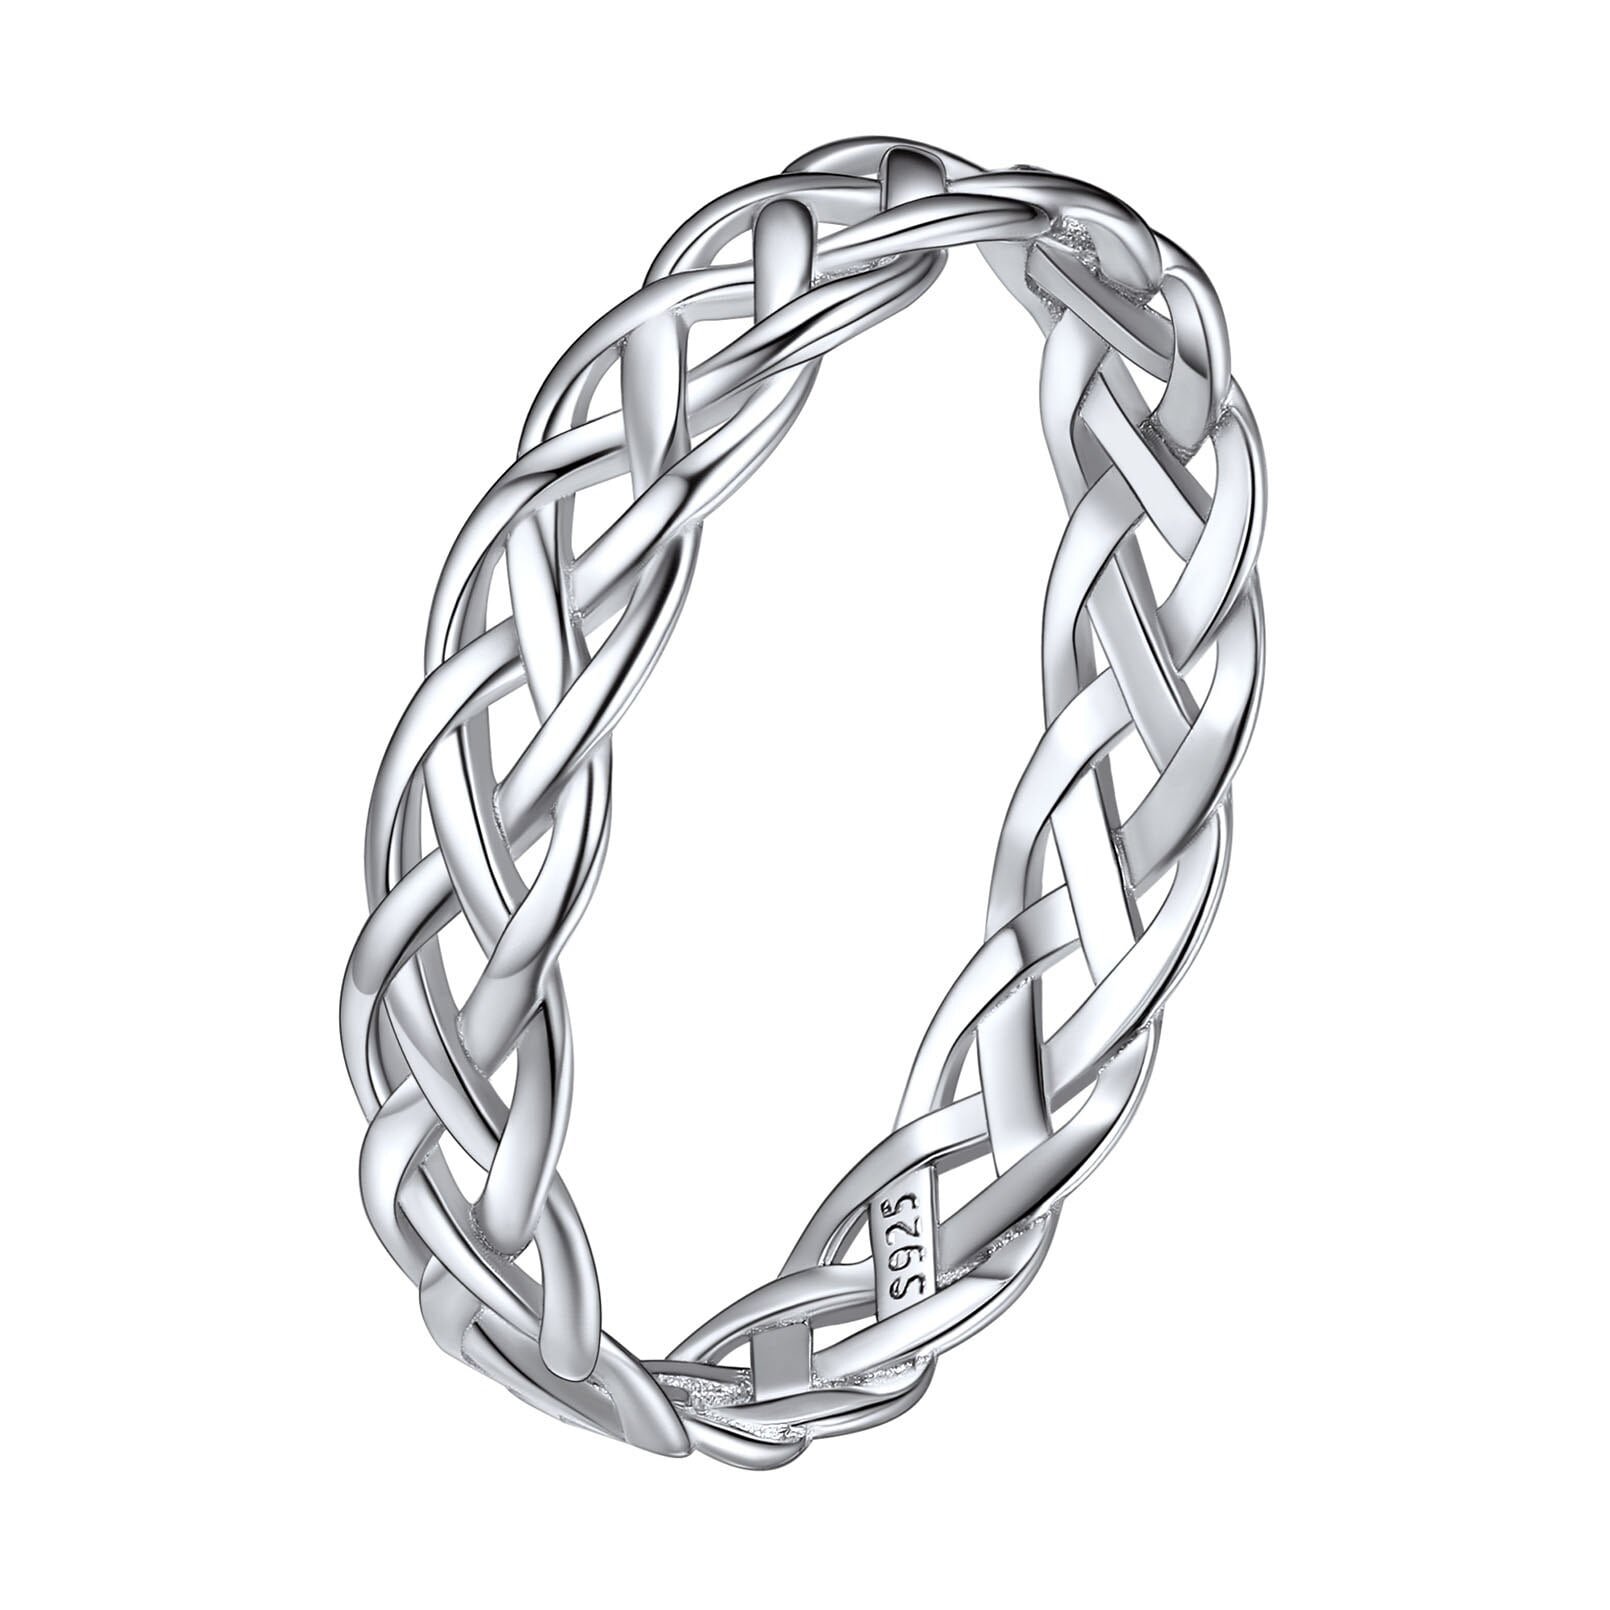 High Polish 925 Sterling Silver Celtic Knot Ring for Women 